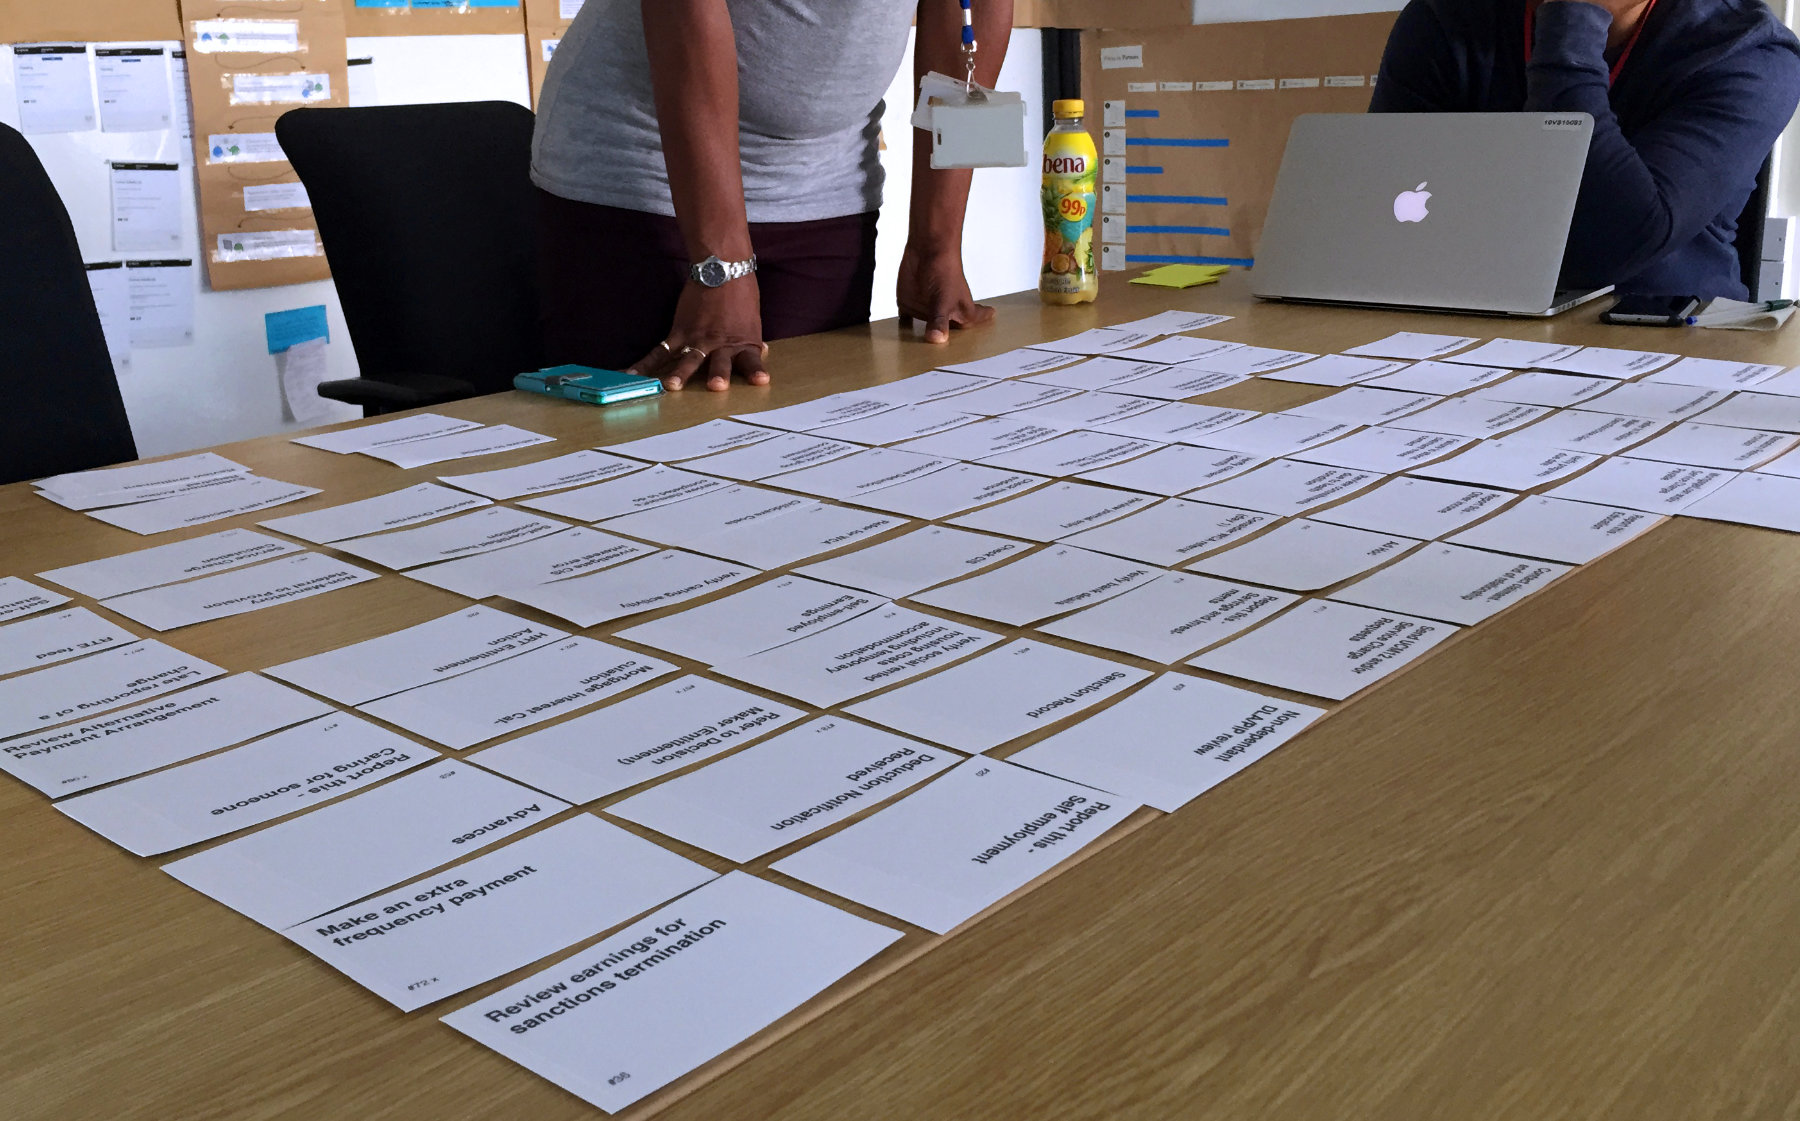 Image: [Fig 2] Card sorting with job centre staff